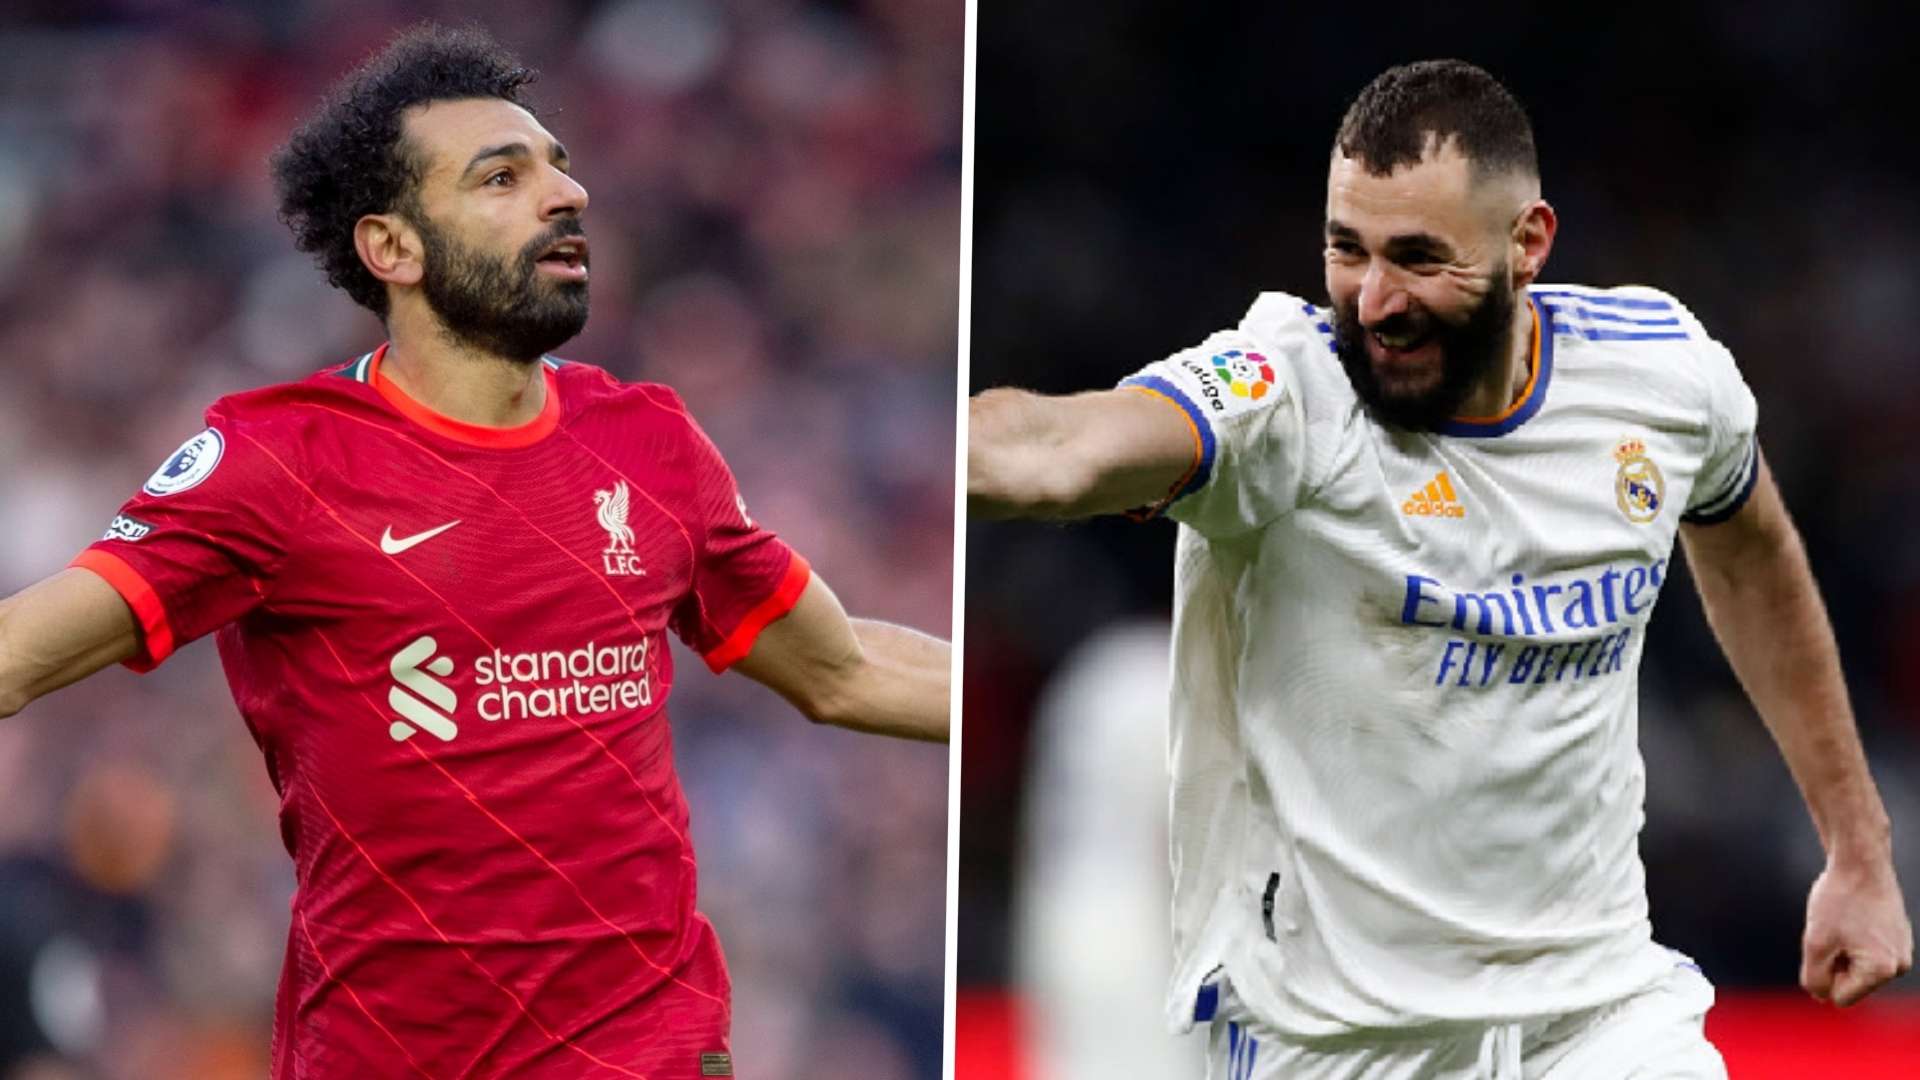 Mohamed Salah of Liverpool and Benzema of Real Madrid.